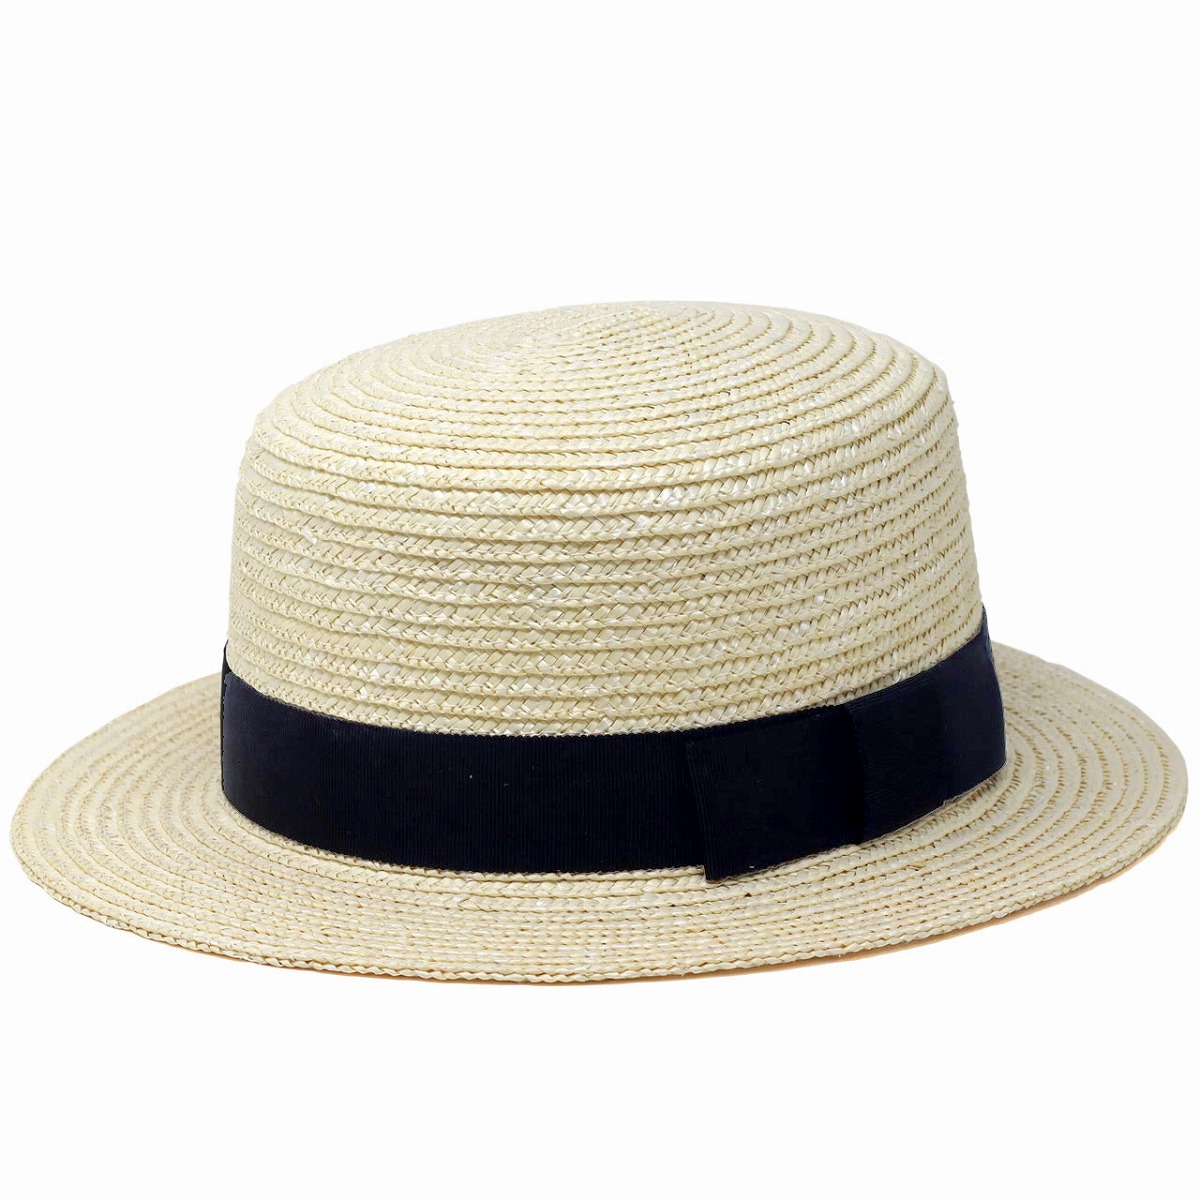 Spring Summer Straw Hat Men S Womens Natural Fiber Bleach Color Boater White Brown Ribbon Women Accessories Gifts Birthday